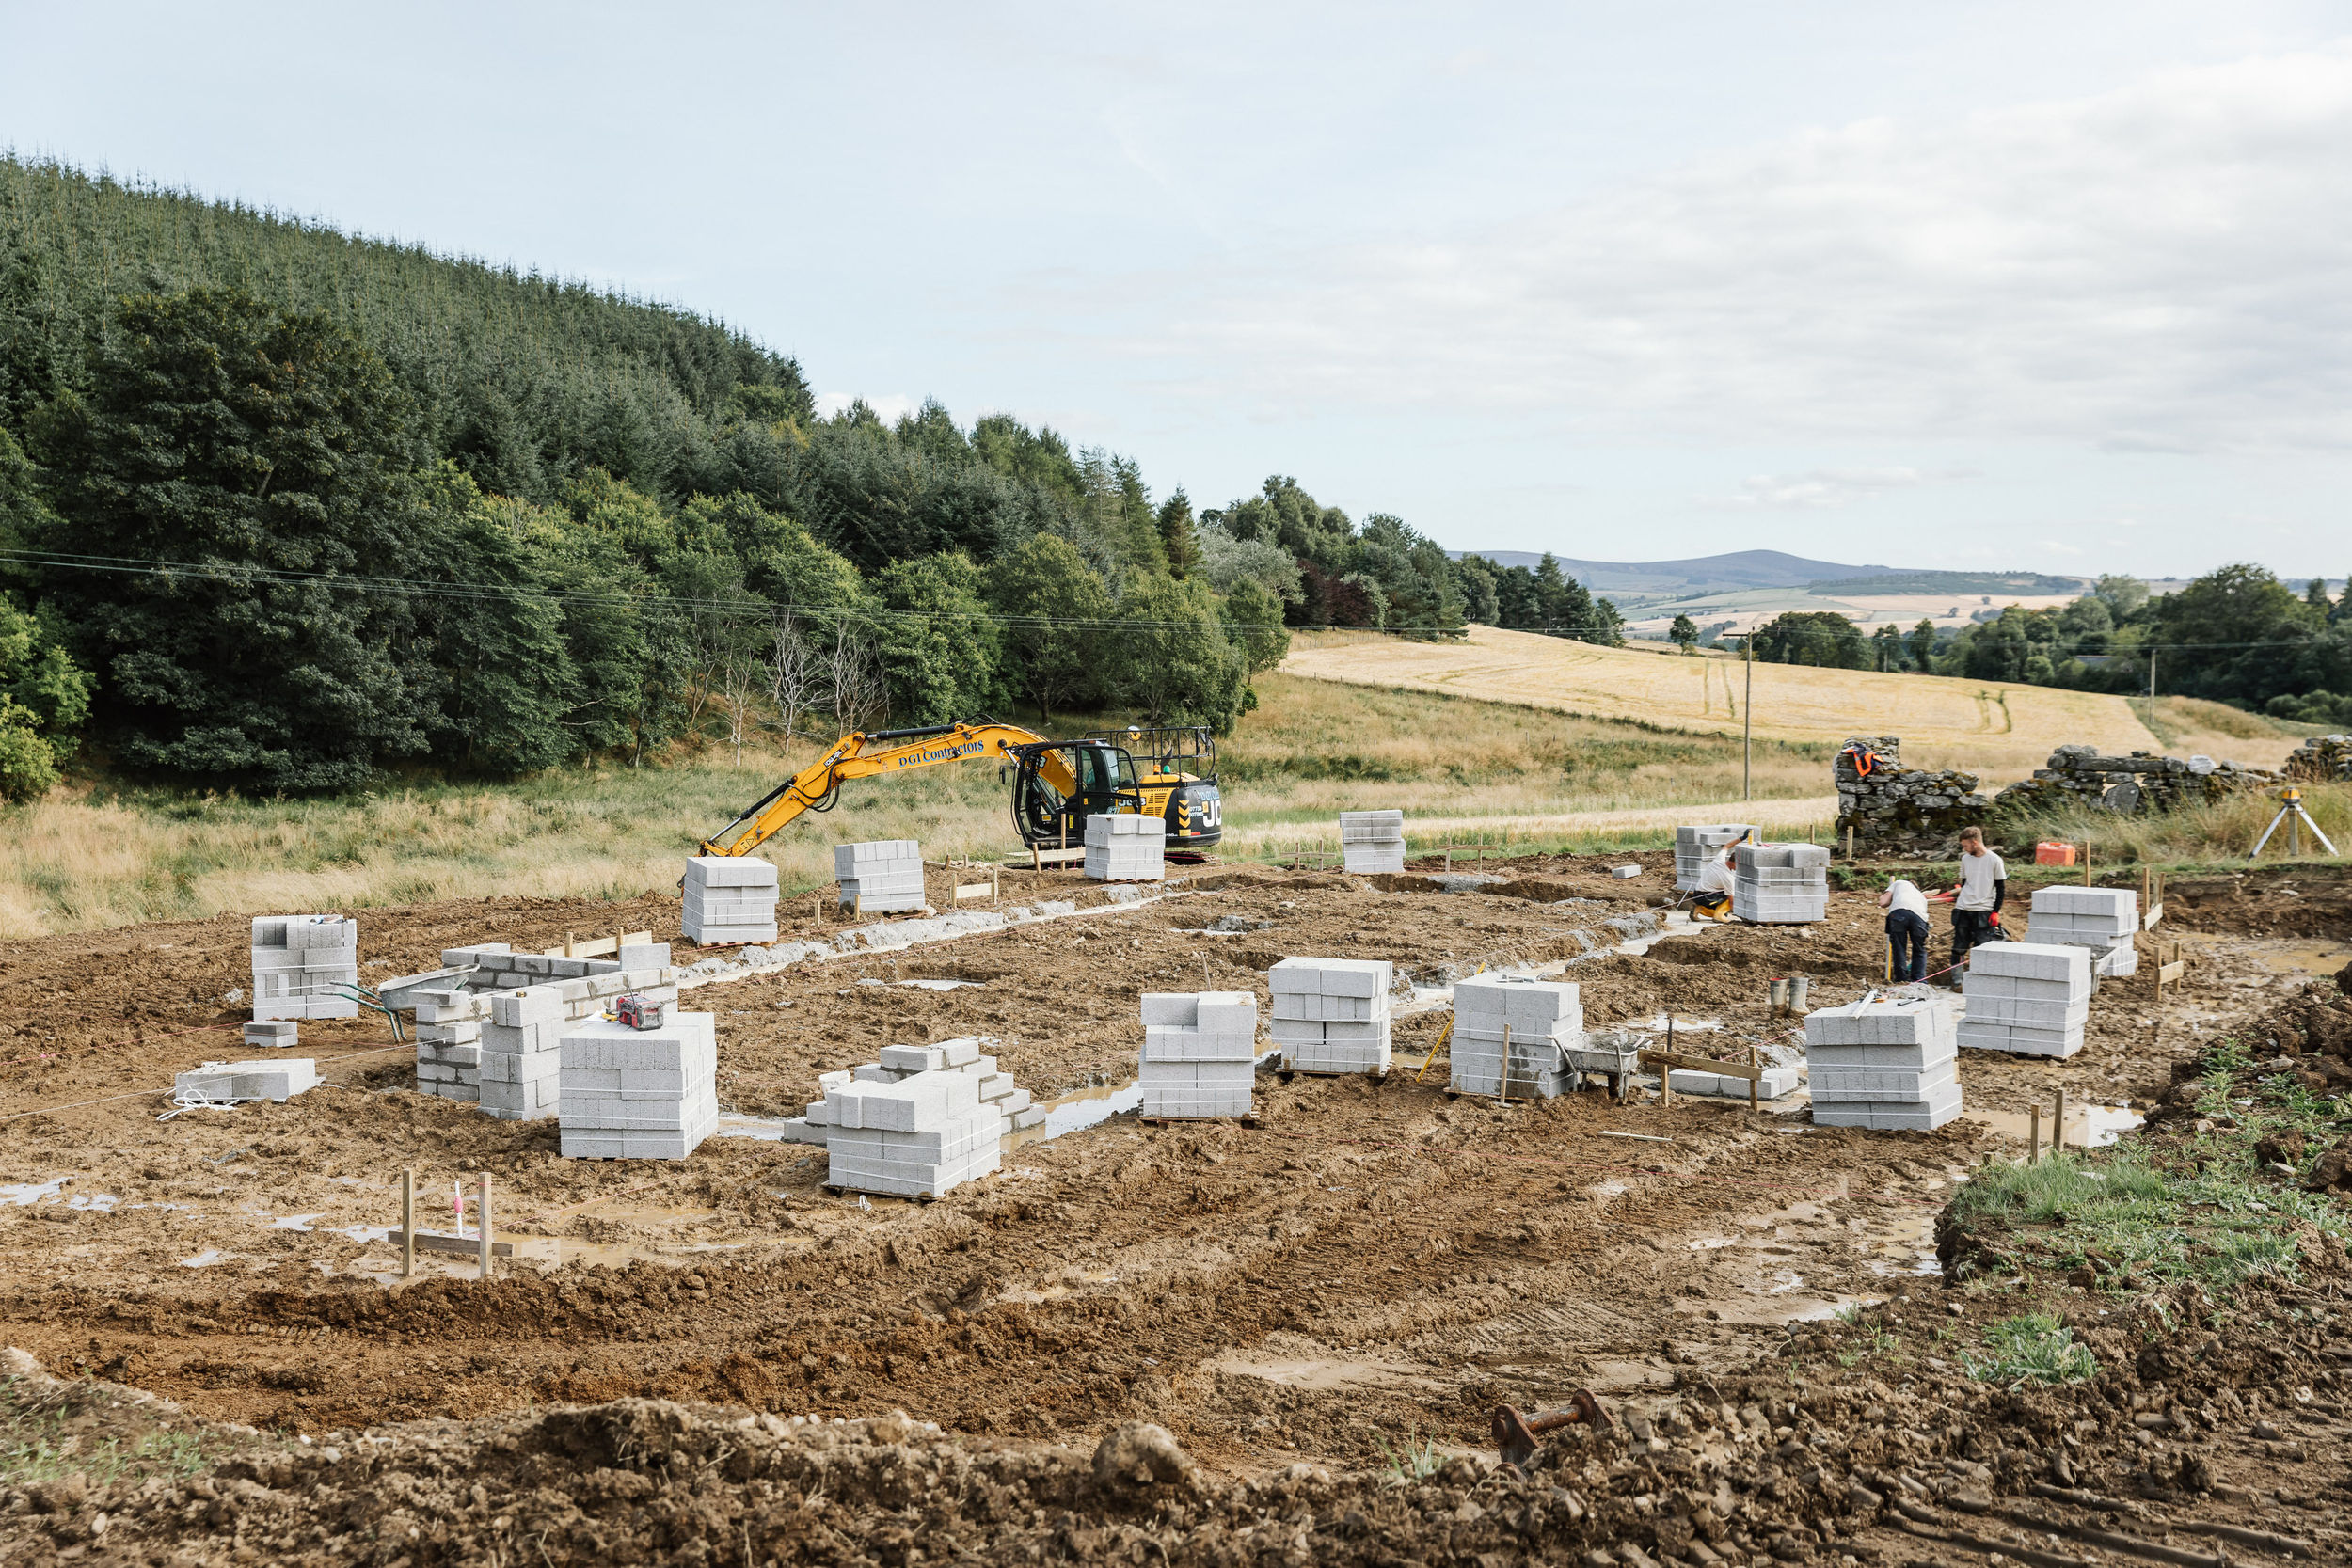 A yellow digger works on a construction site where a new house is being built. Concrete blocks are stacked in piles around the site. Two builders are speaking to each other. Forest surrounds the site.